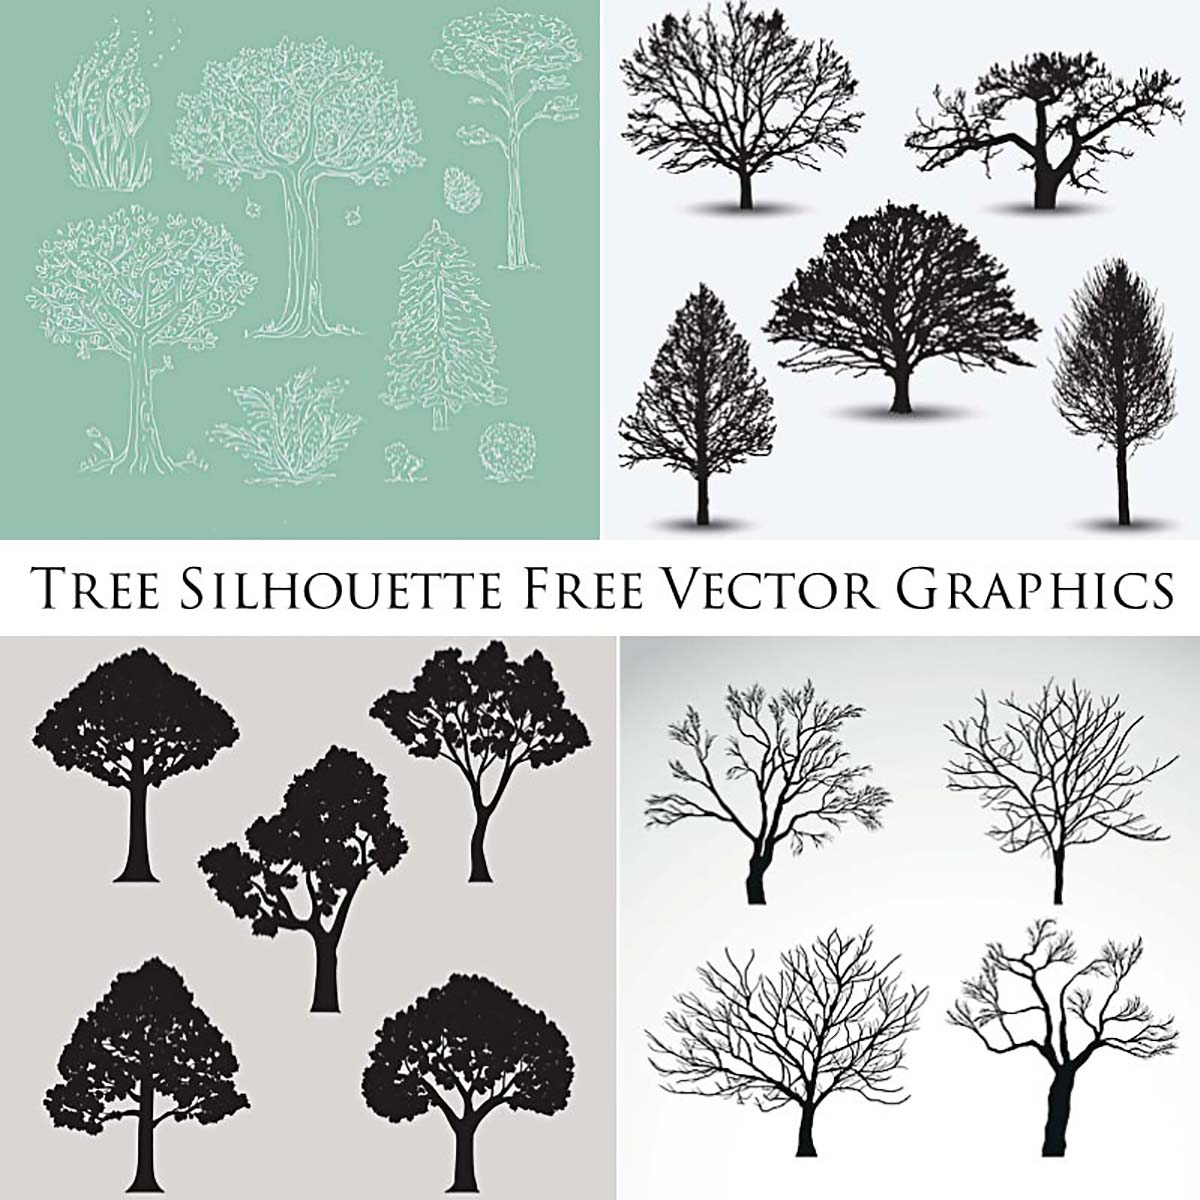 Winter tree silhouettes free vector graphic